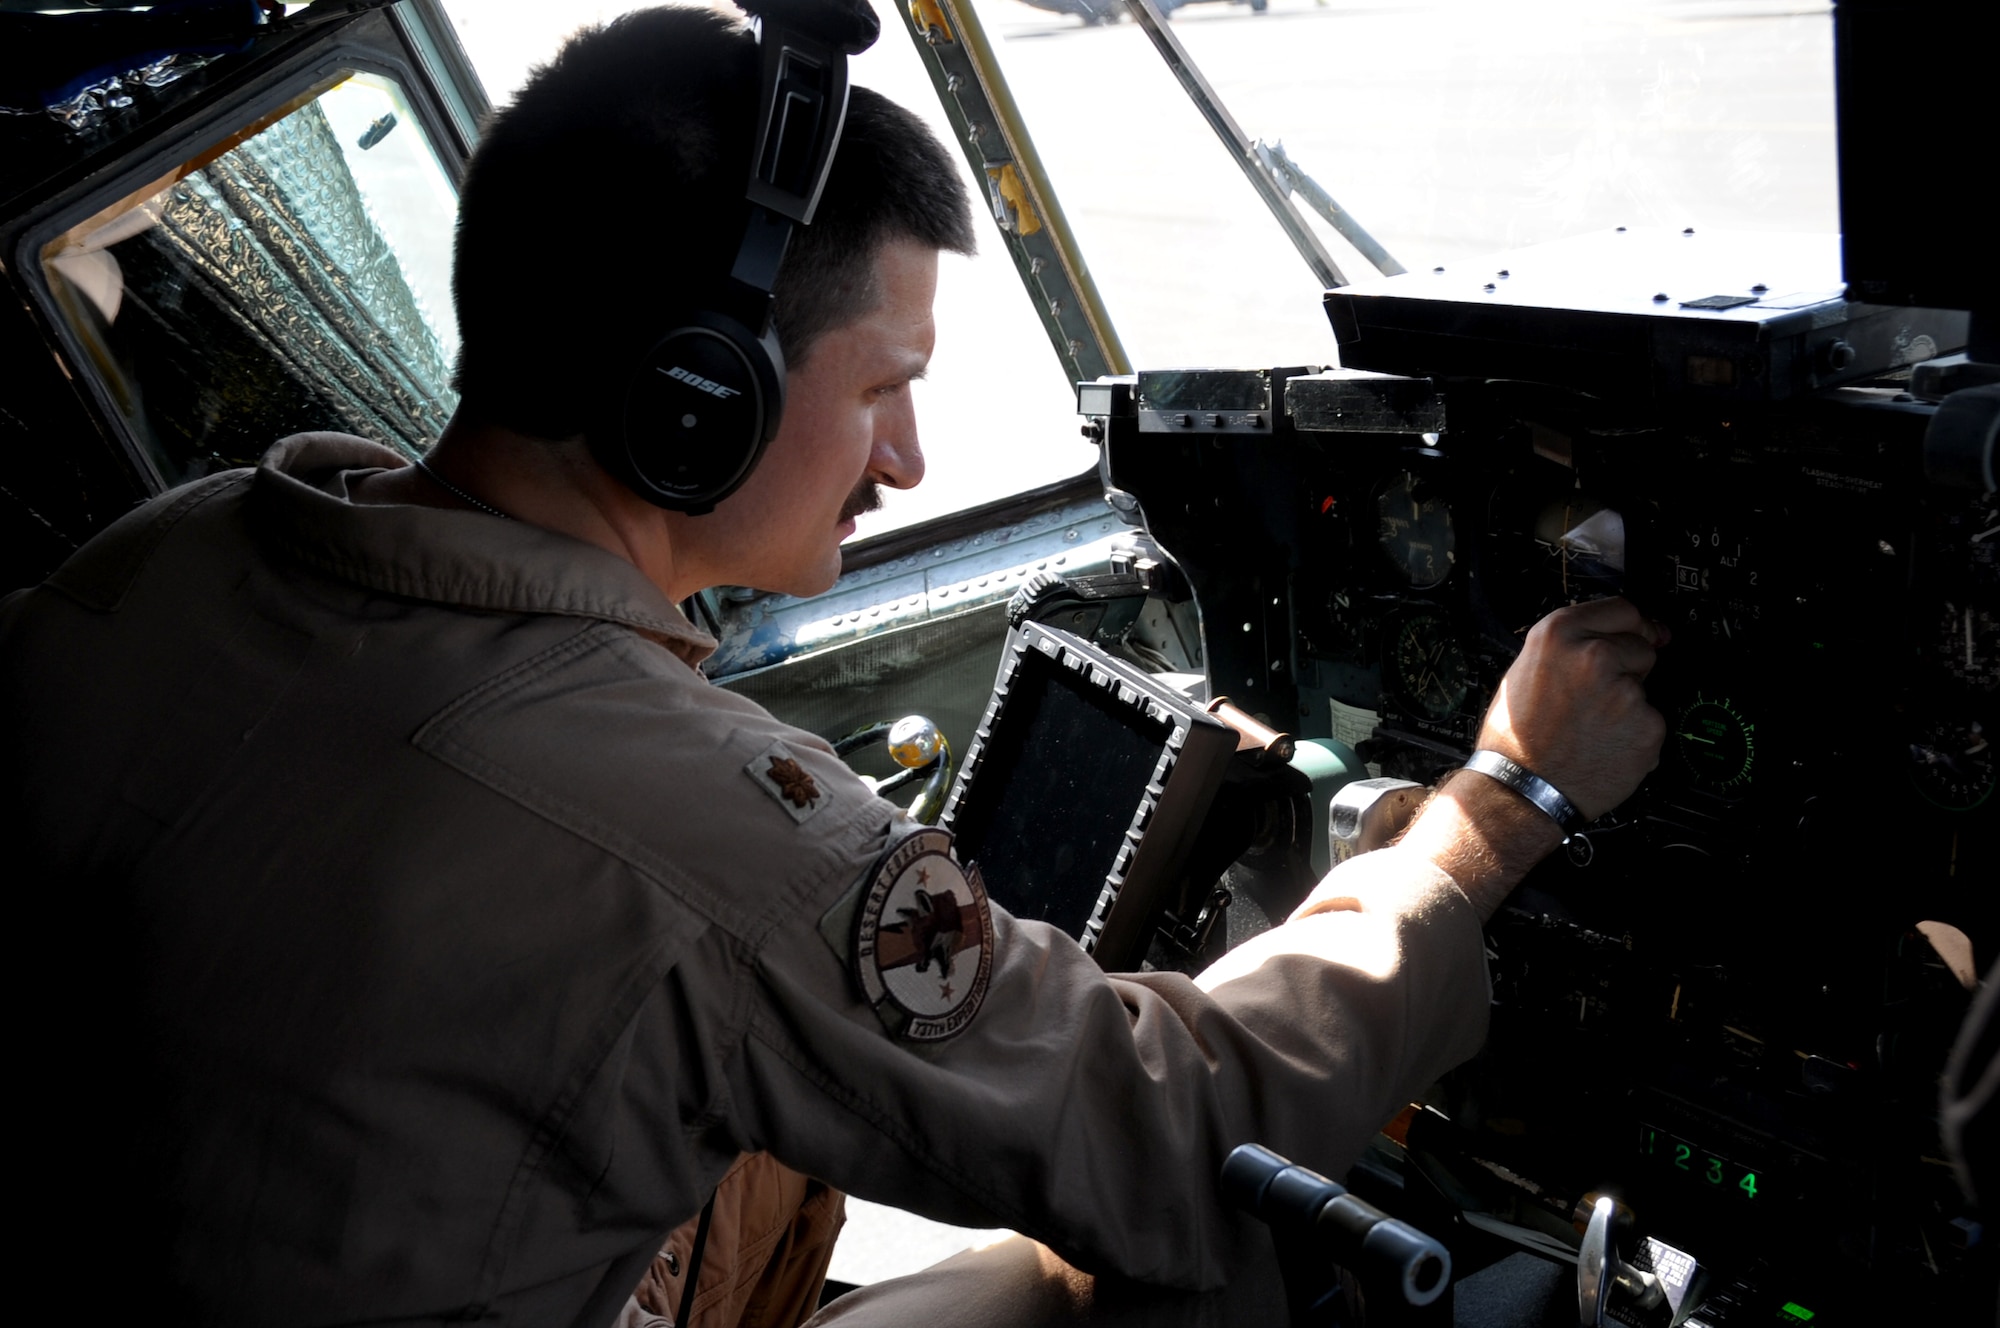 Maj. Cody Burroughs, 737th Expeditionary Airlift Squadron pilot, performs preflight inspections in a C-130H Hercules Feb. 28, 2017 at an undisclosed location in Southwest Asia. The mission of the 737th is to deliver personnel and cargo downrange in support of Operation Inherent Resolve. (U.S. Air Force photo/Tech. Sgt. Kenneth McCann)